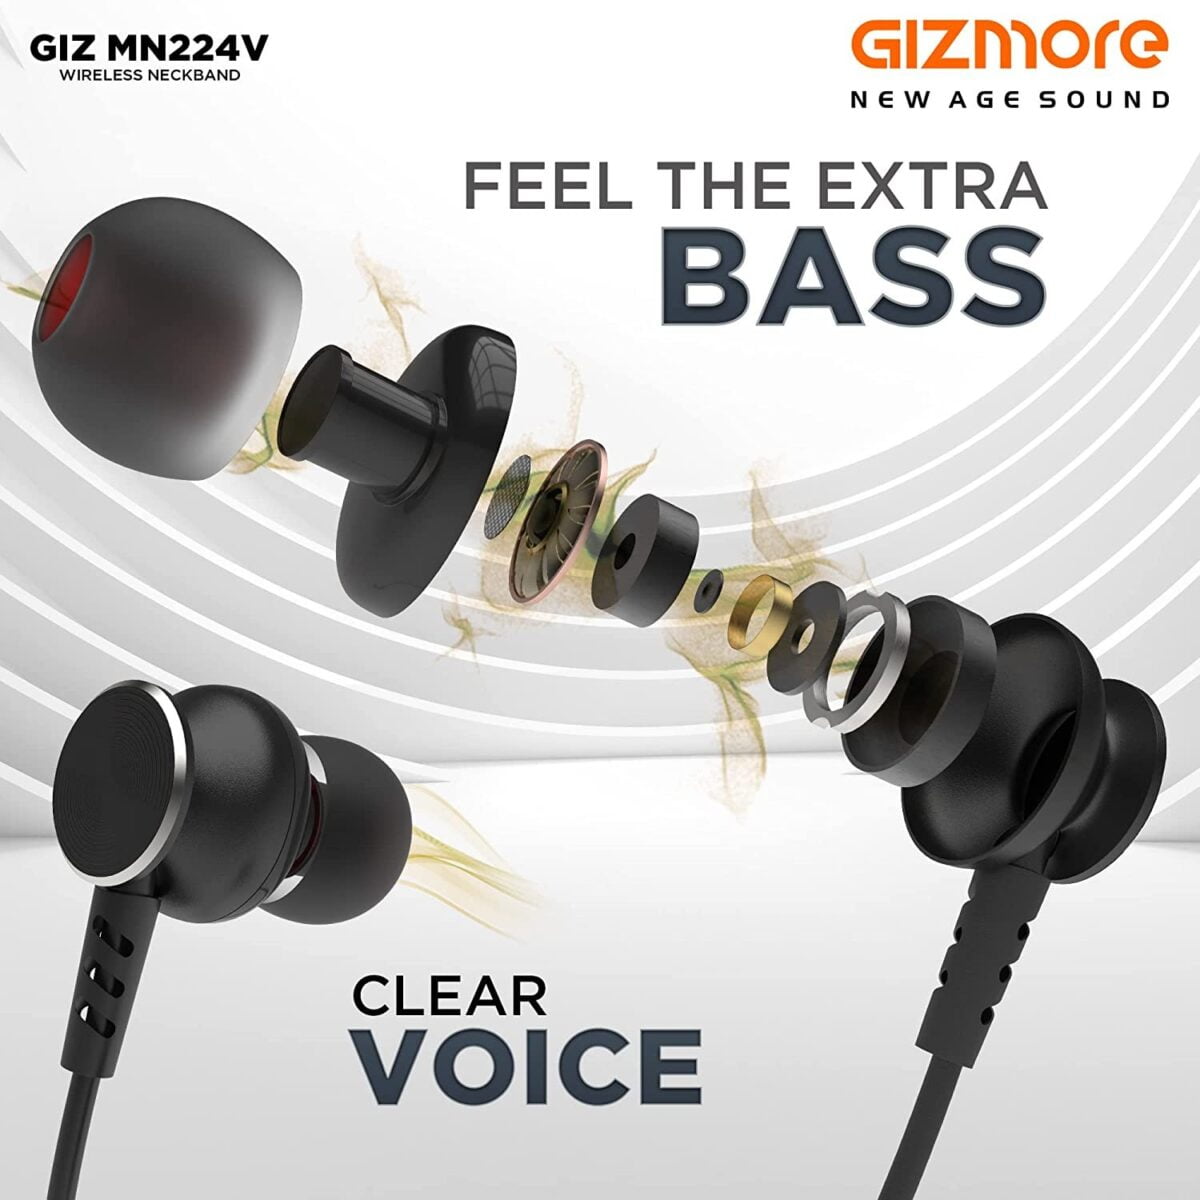 Gizmore MN224V Bluetooth Wireless Neckband 2 Shop Mobile Accessories Online in India